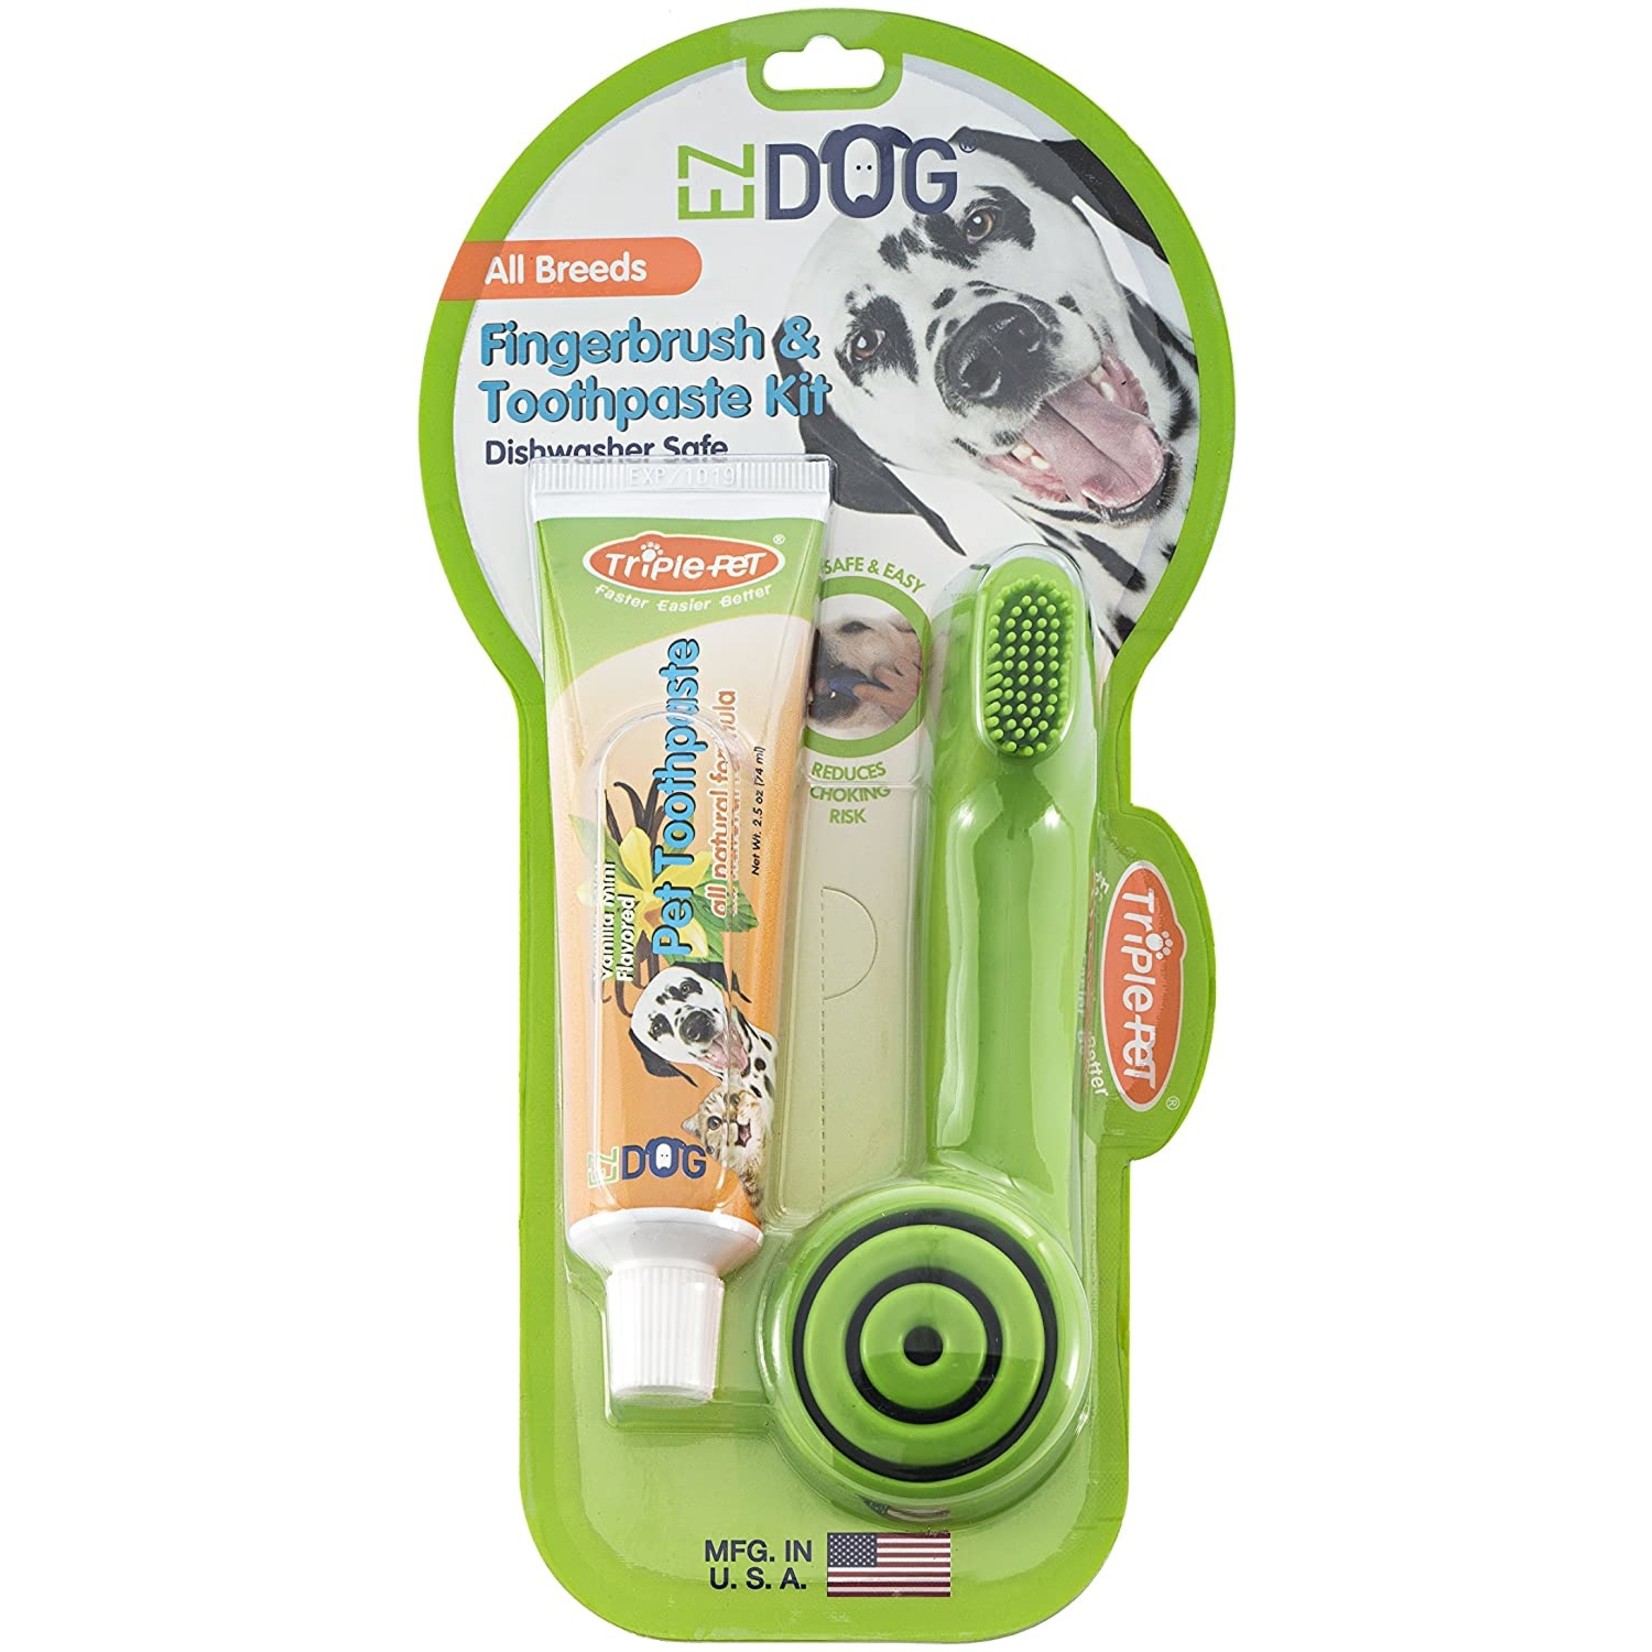 Triple Pet Triple Pet EZ Dog Dental Kit with Toothbrush and Vanilla Mint Pet Toothpaste - Fingerbrush, Small Breed, Large Breed